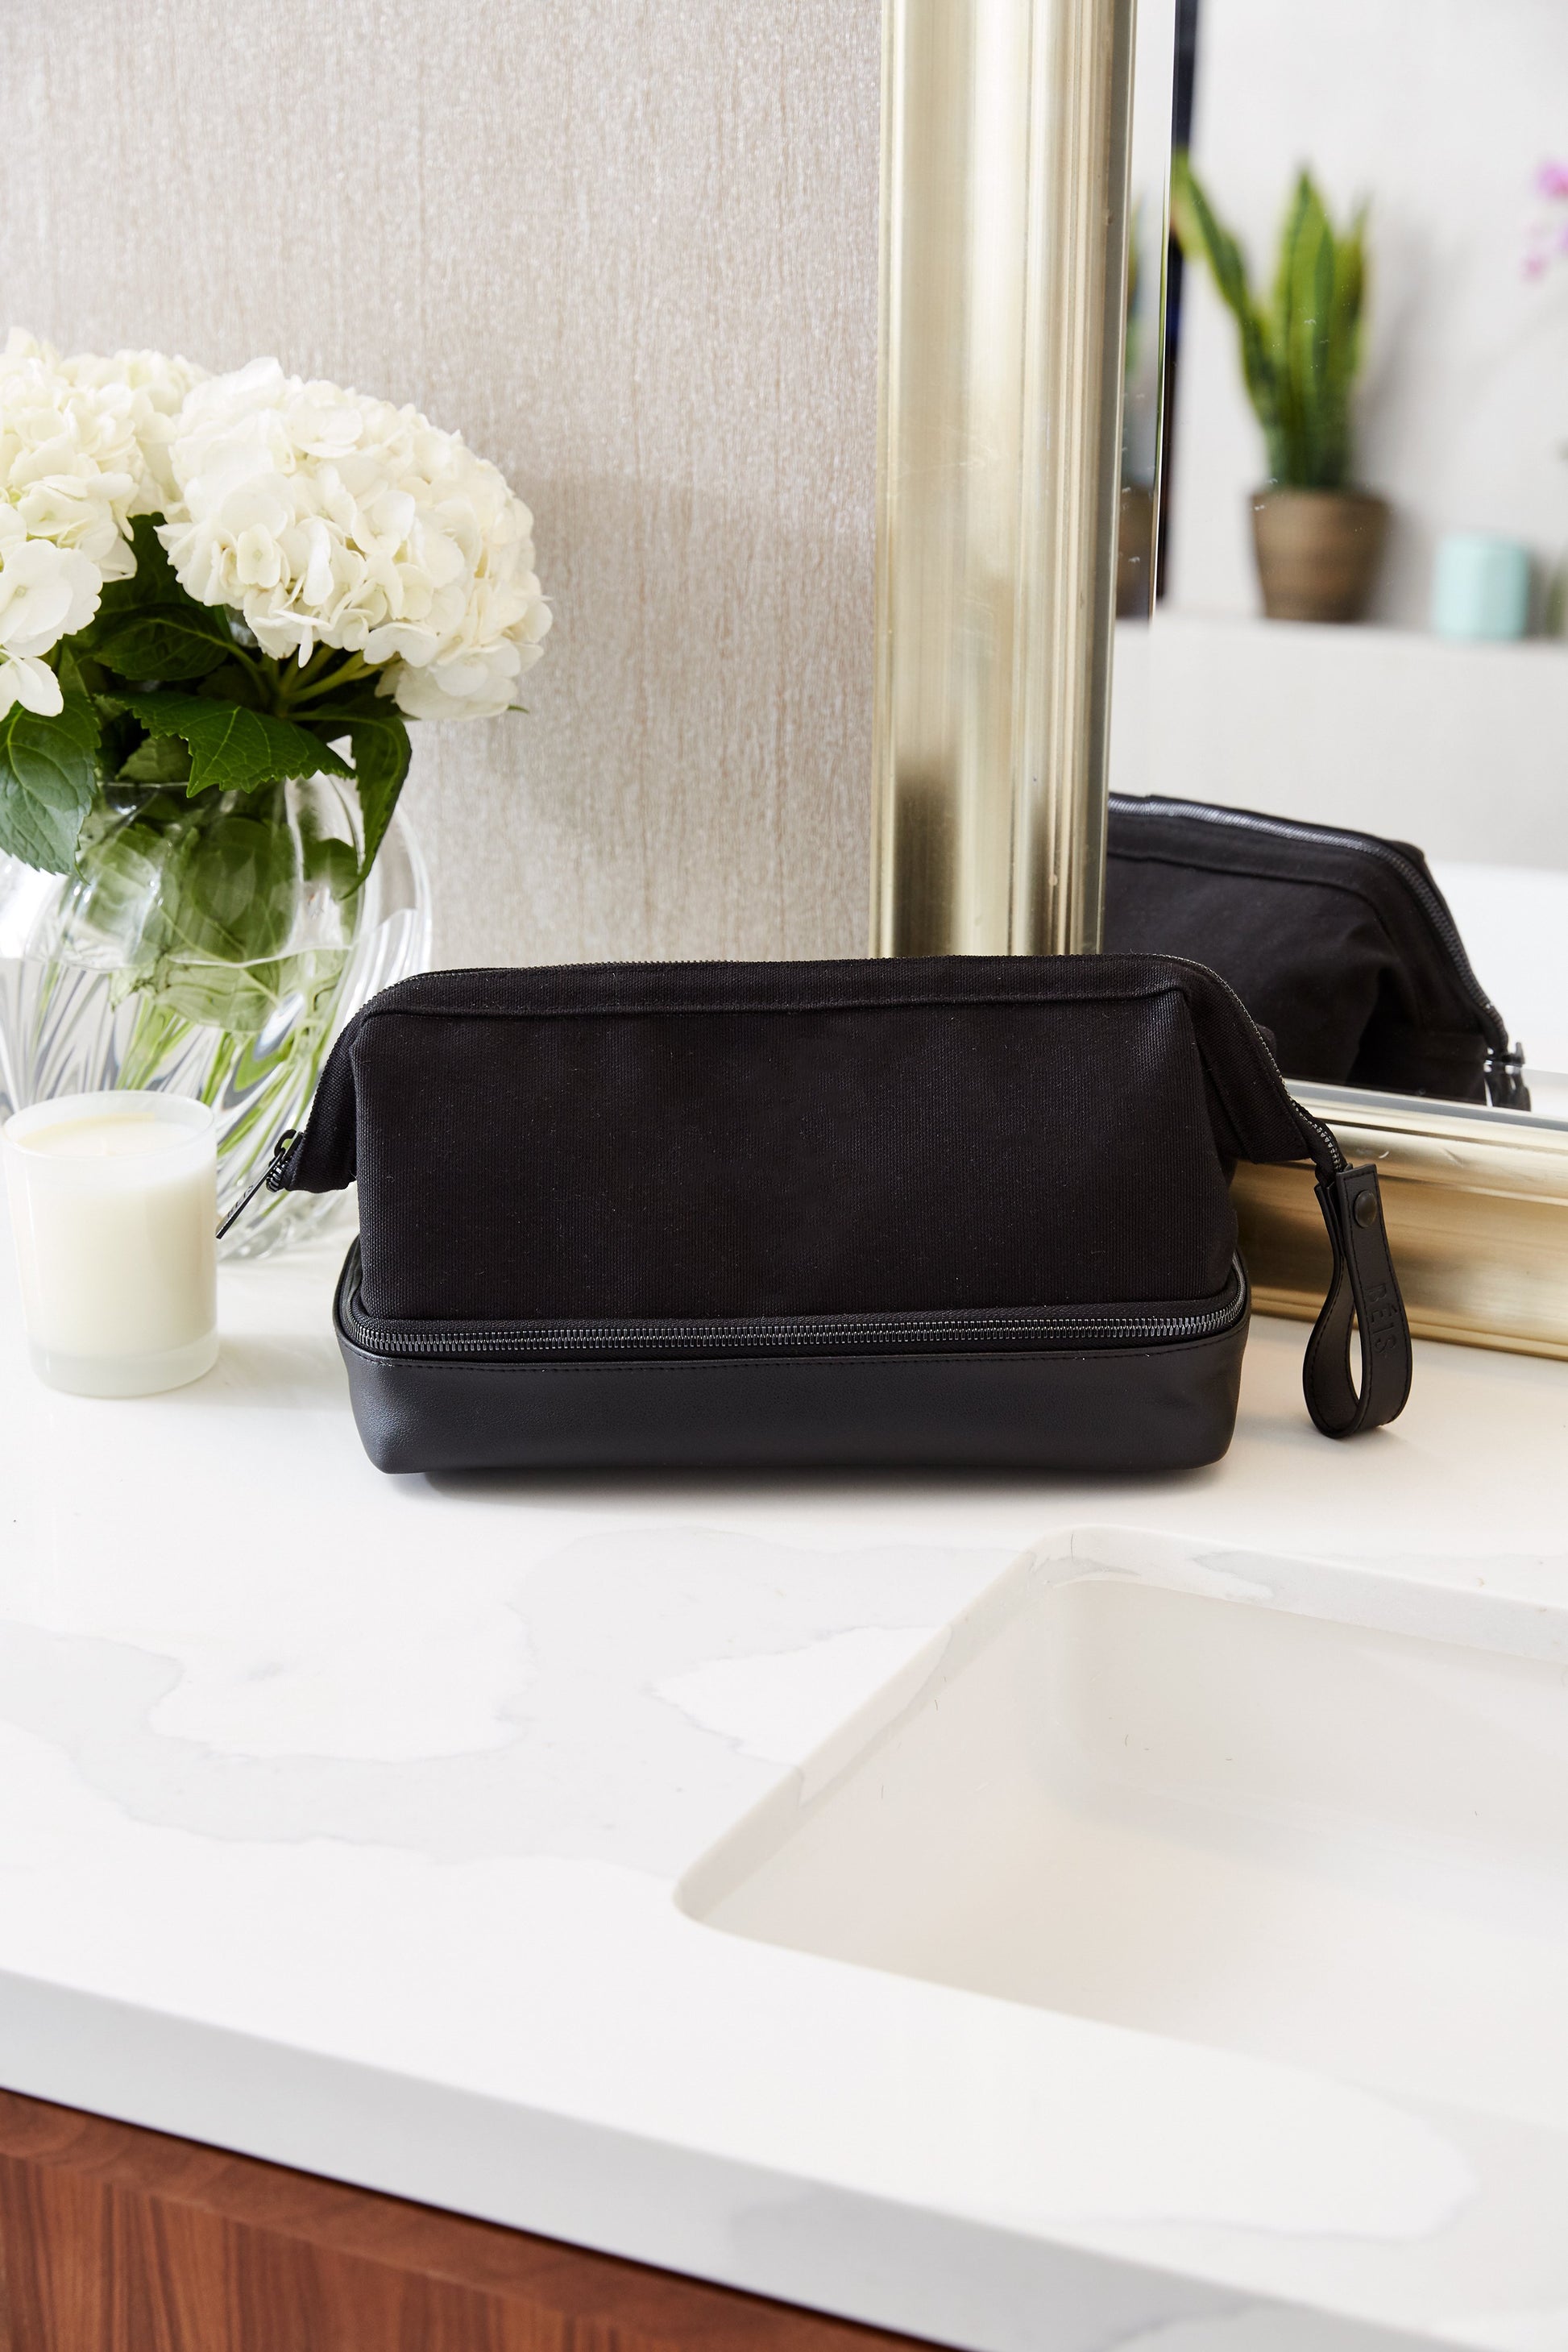 BEIS by Shay Mitchell | The Dopp Kit (With Flowers)